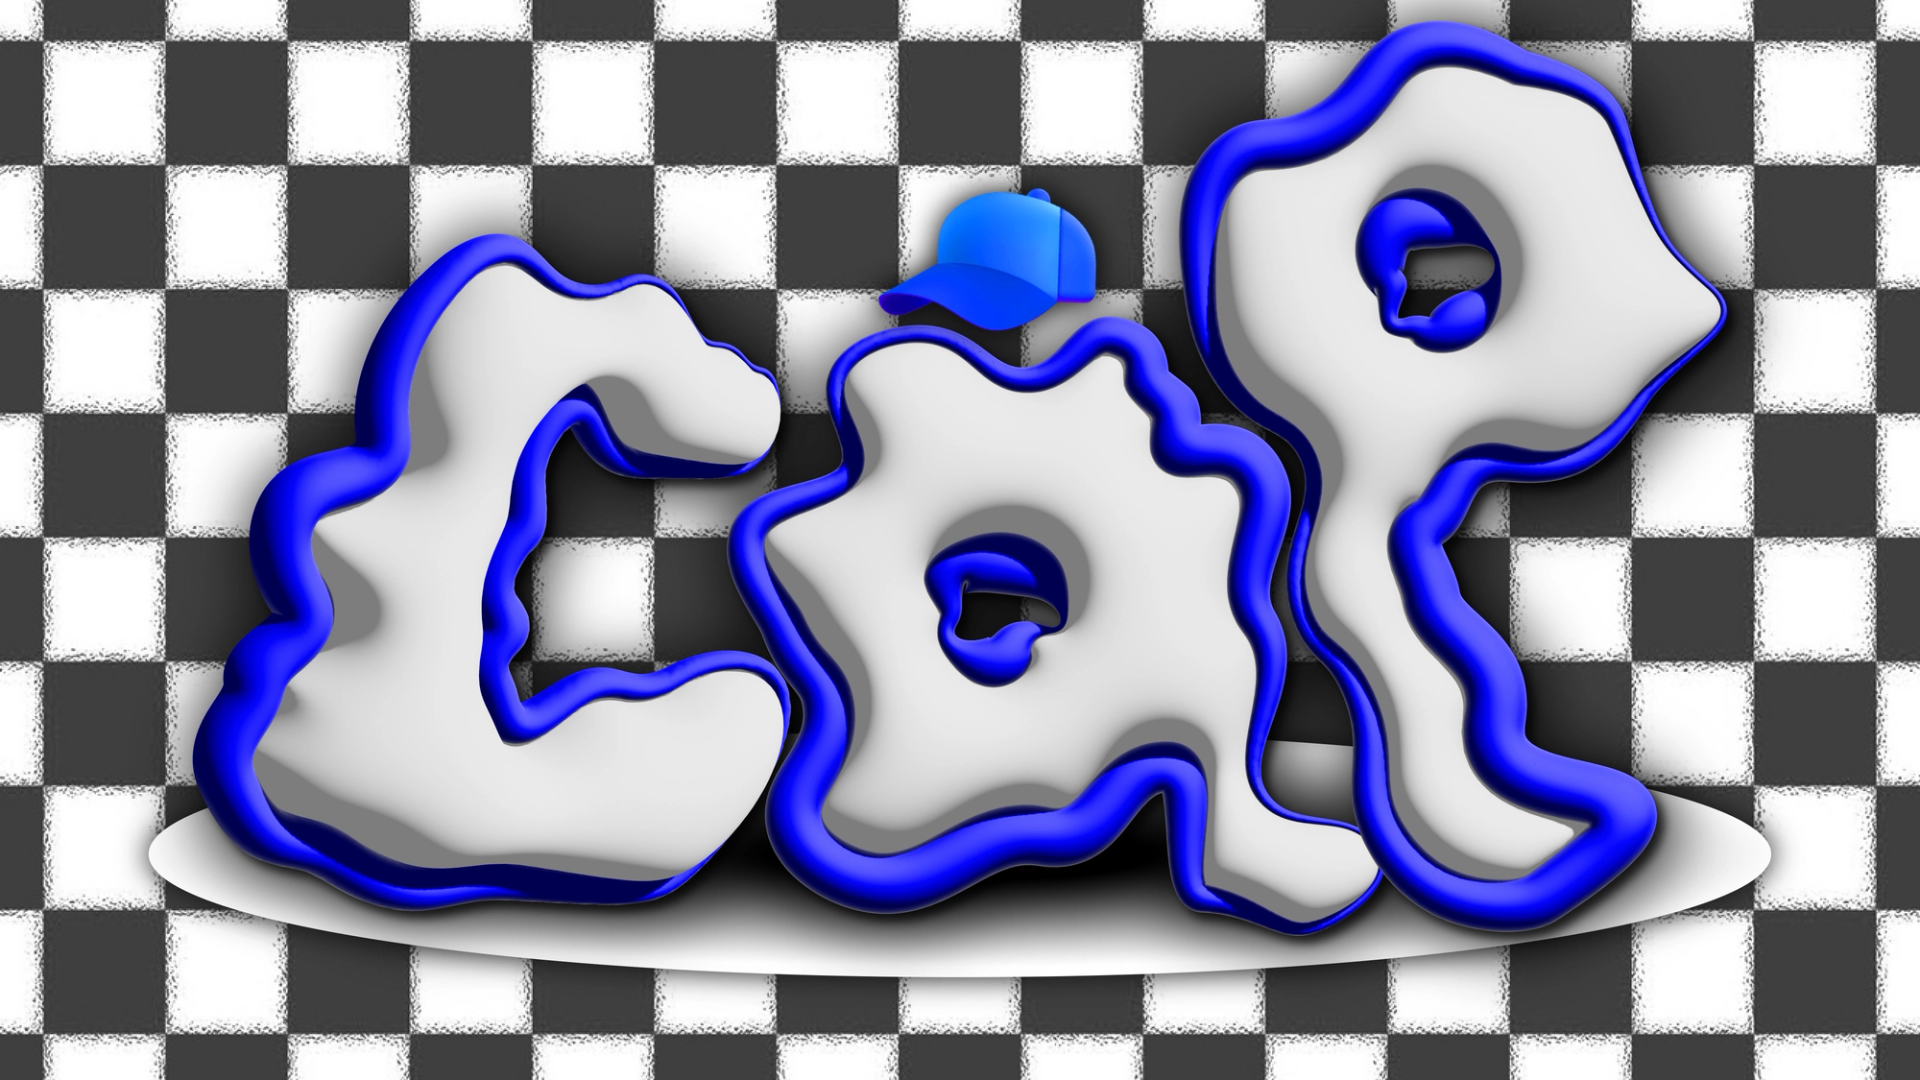 CAP in white wiggly letters outlined in blue on a checkerboard background